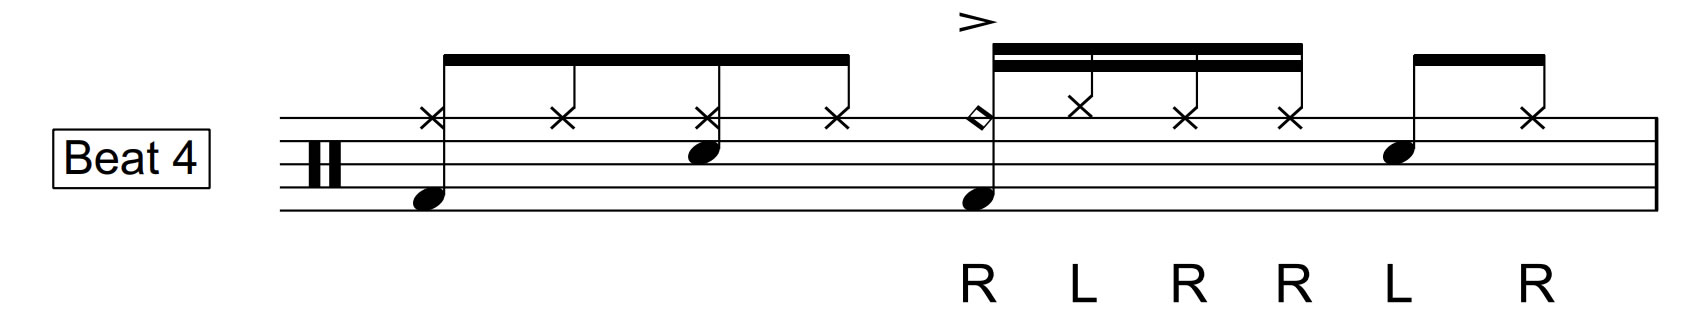 how to play paradiddle in a beat